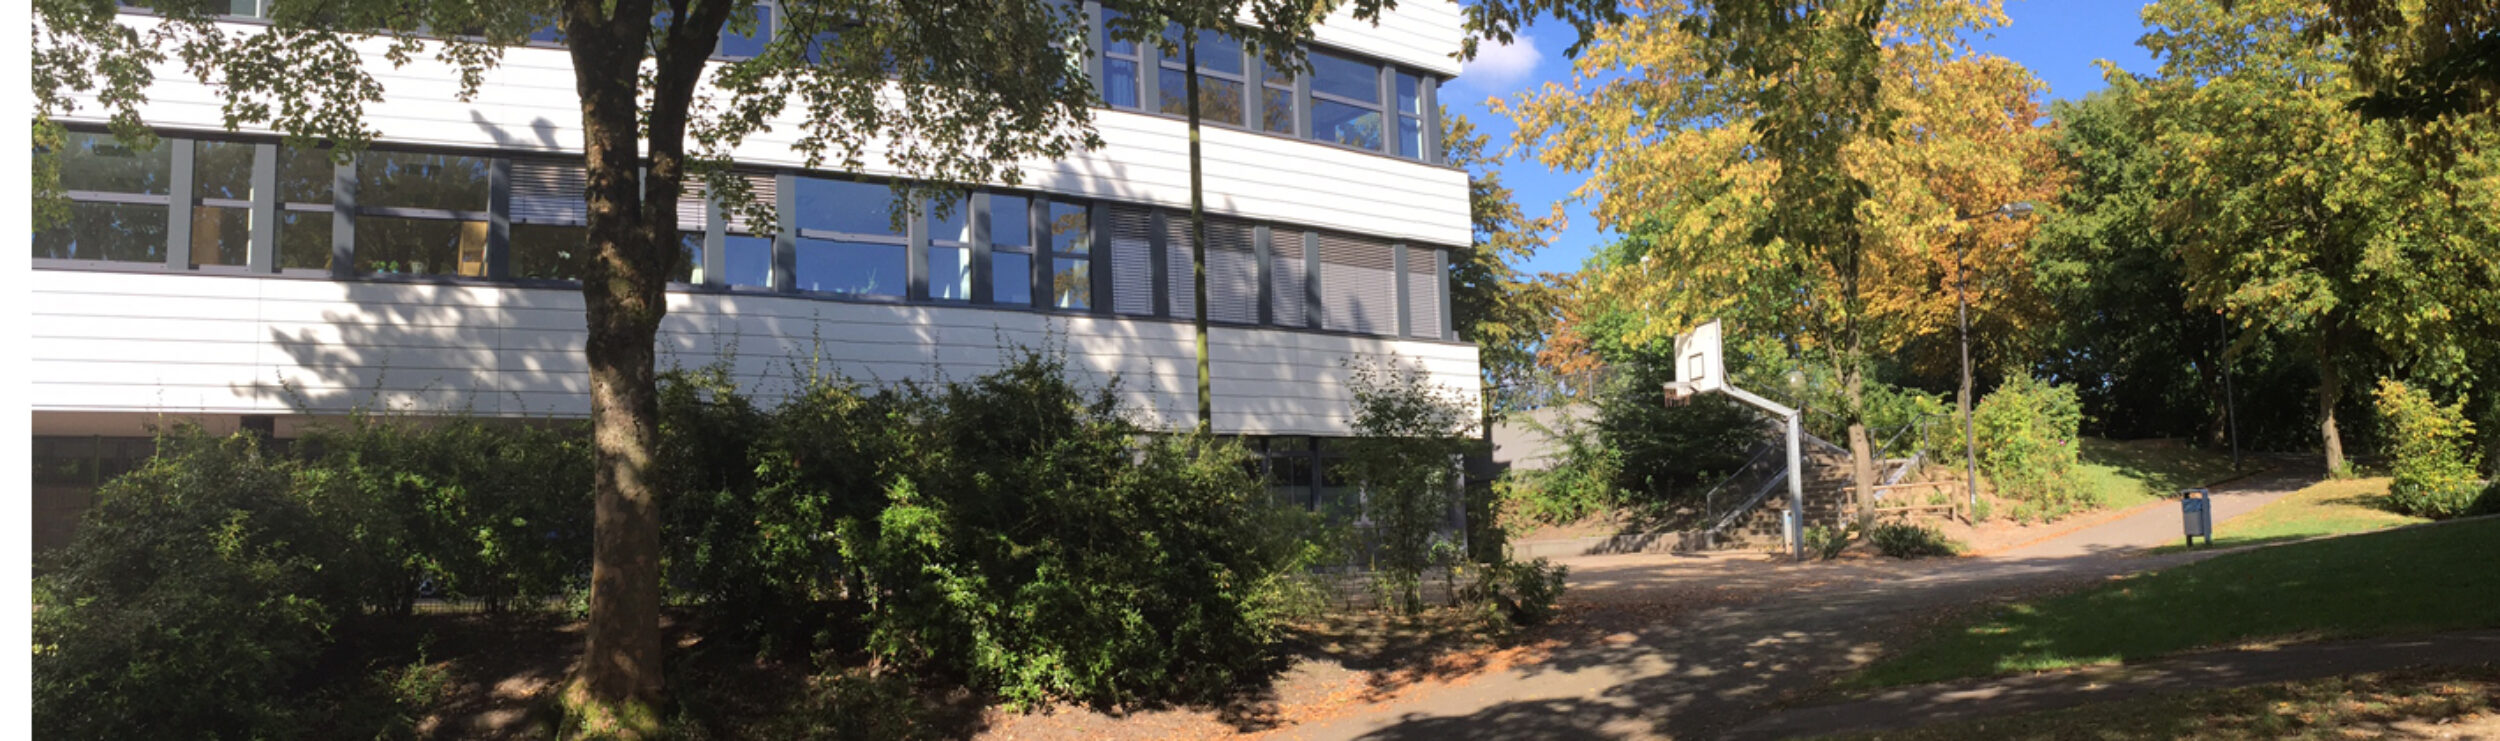 Max-Planck-Realschule Wuppertal